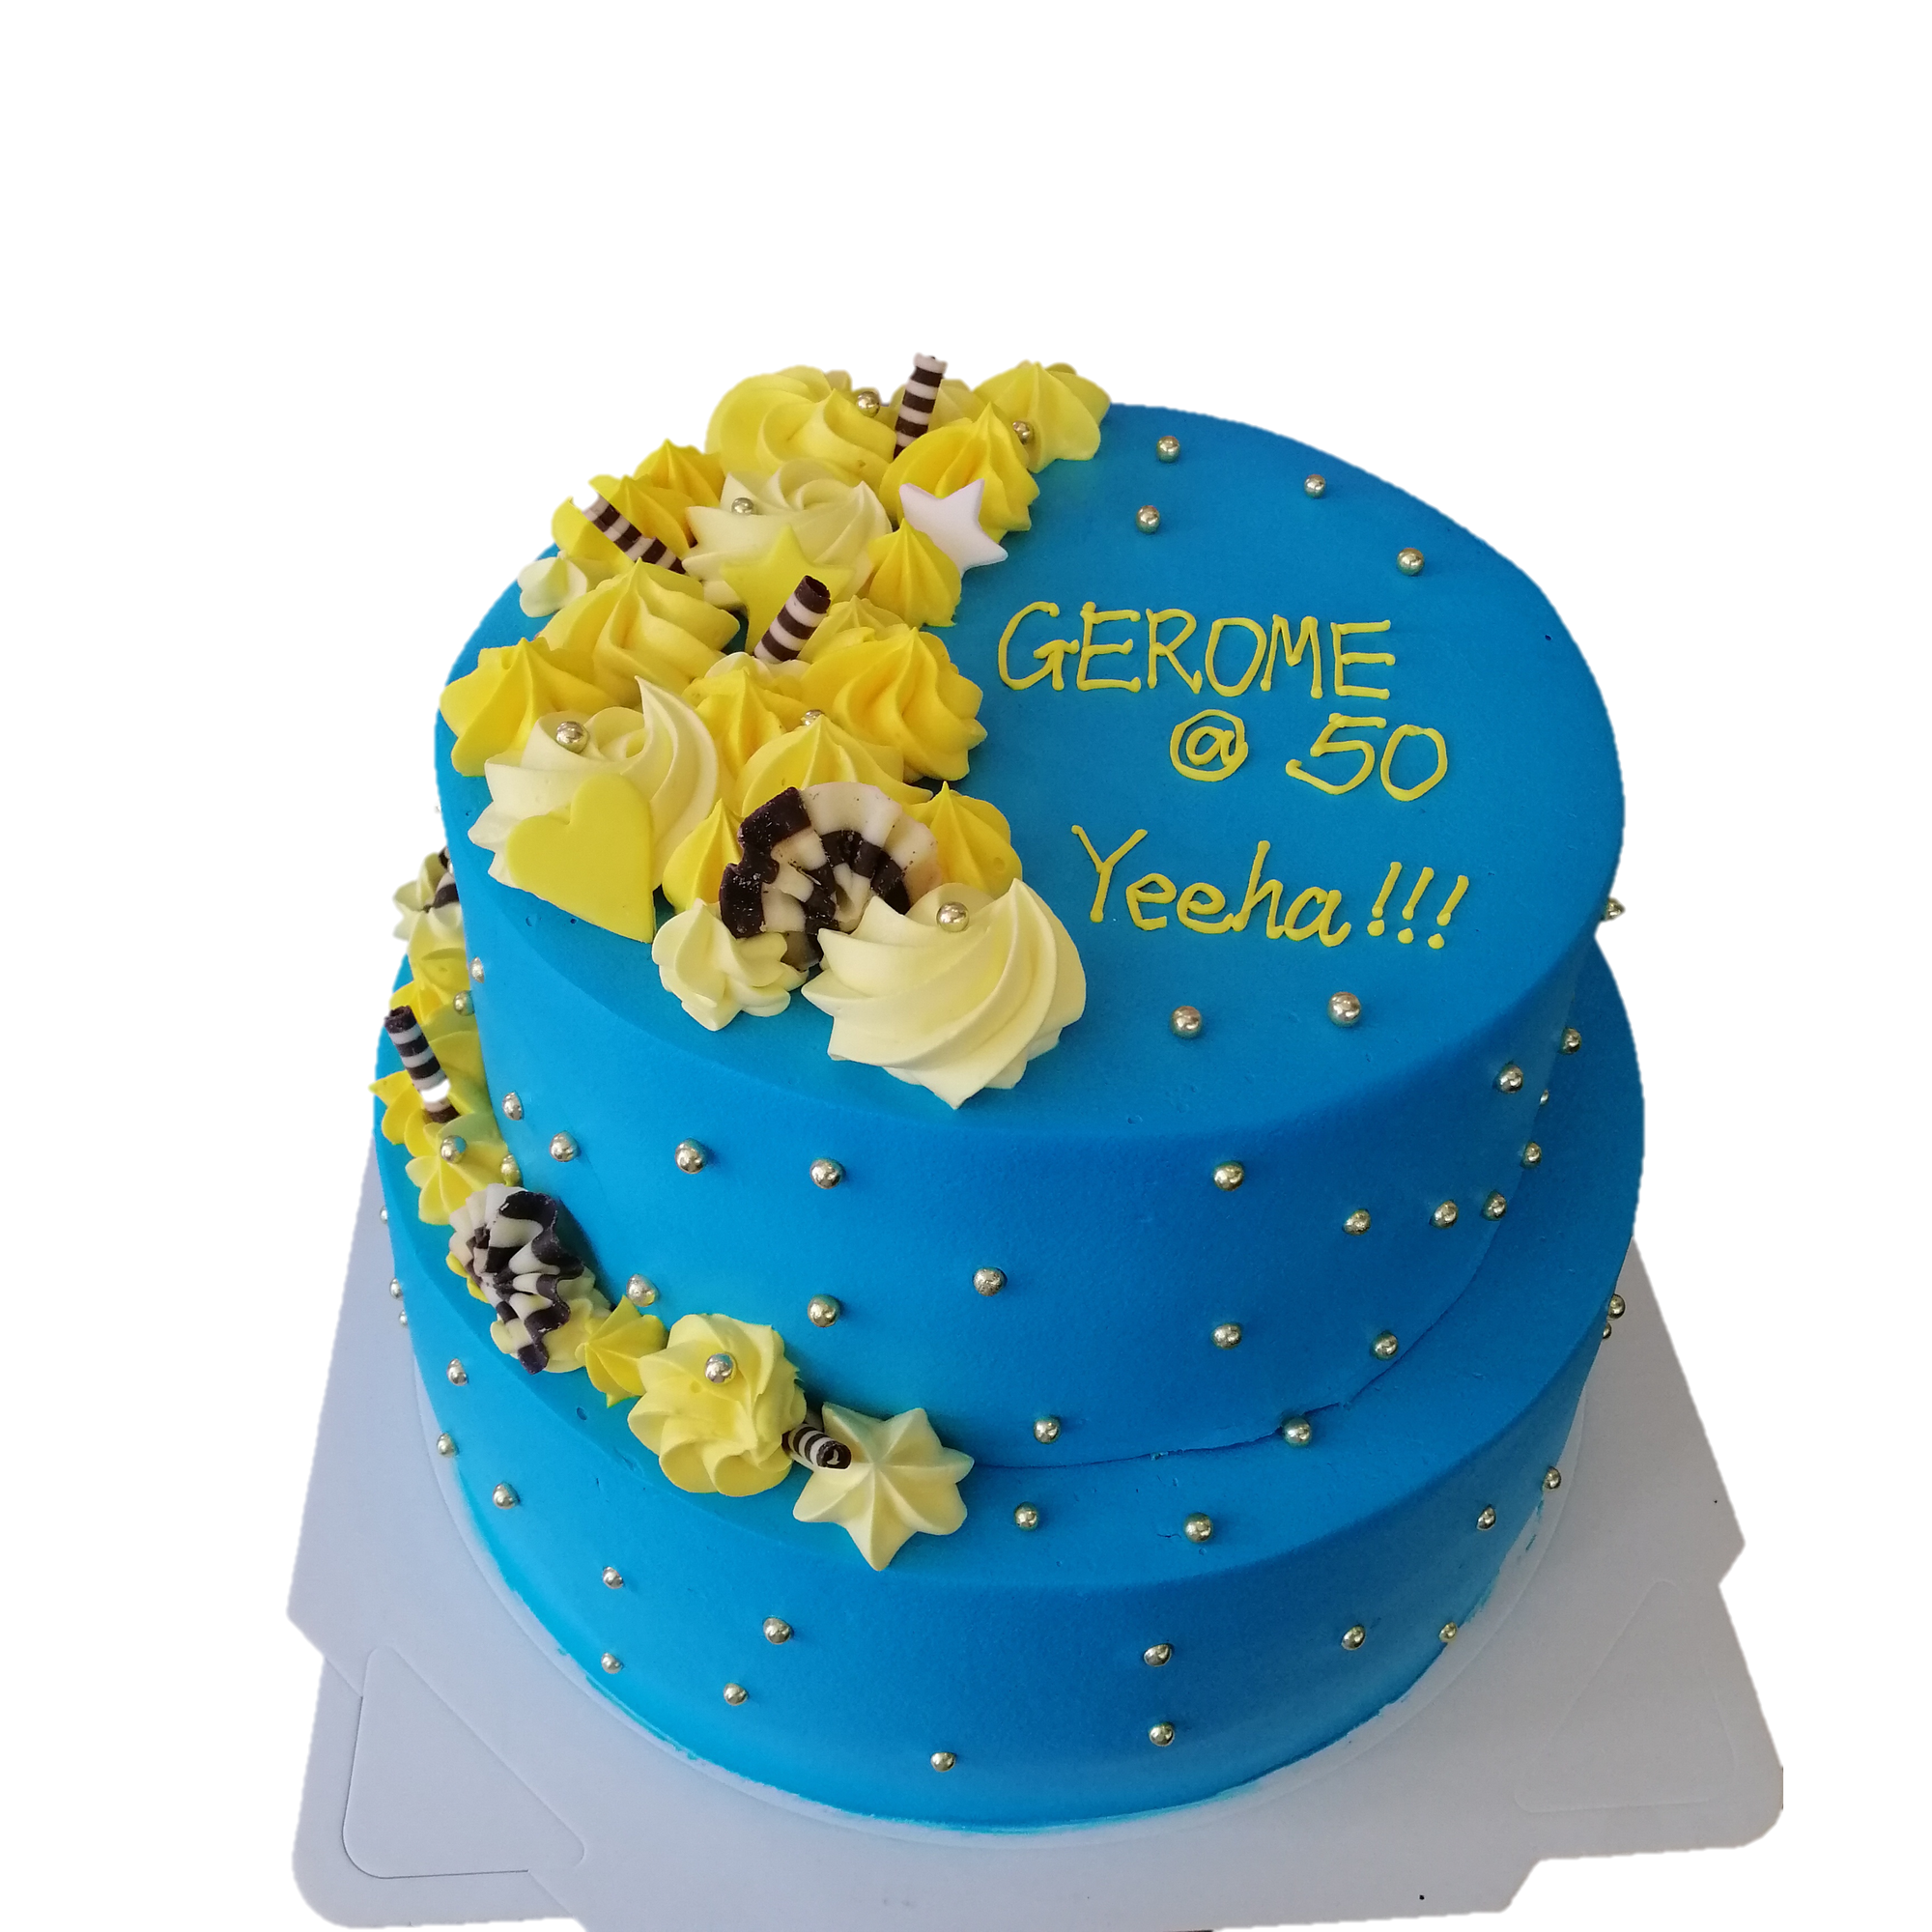 Sky Blue Ombre Cake With White Floral